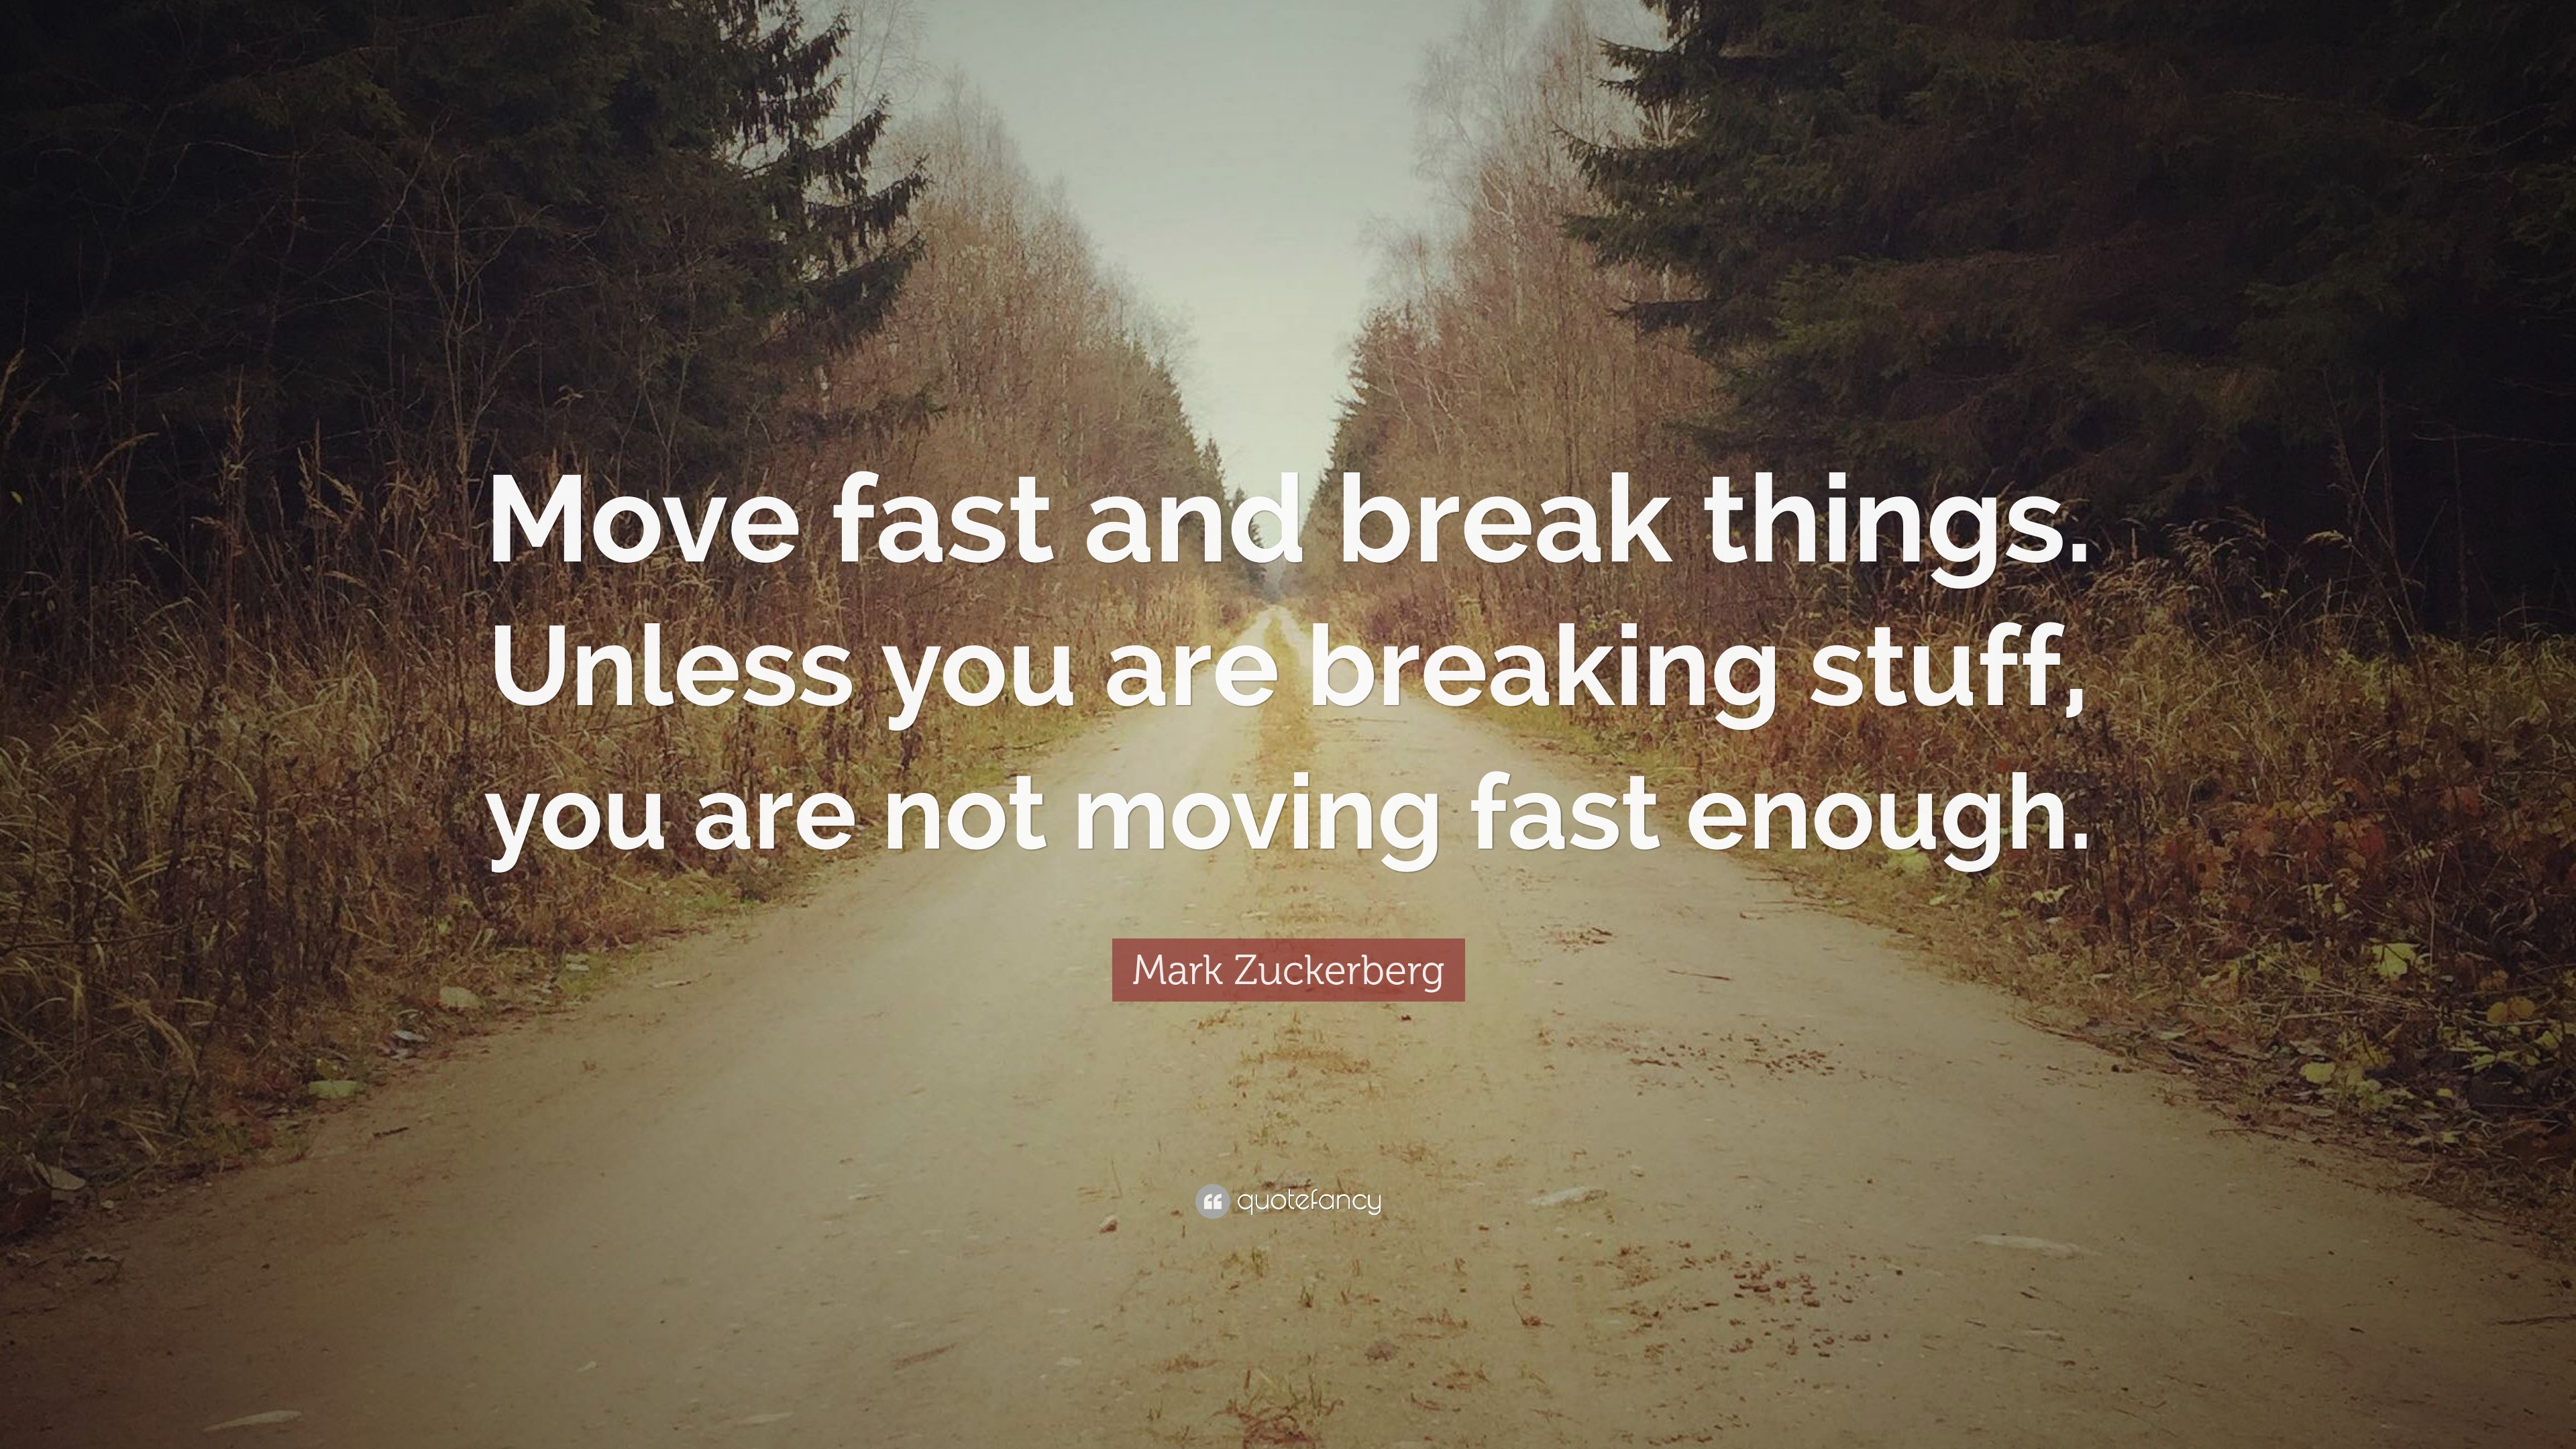 Mark Zuckerberg Quote “Move fast and break things. Unless you are